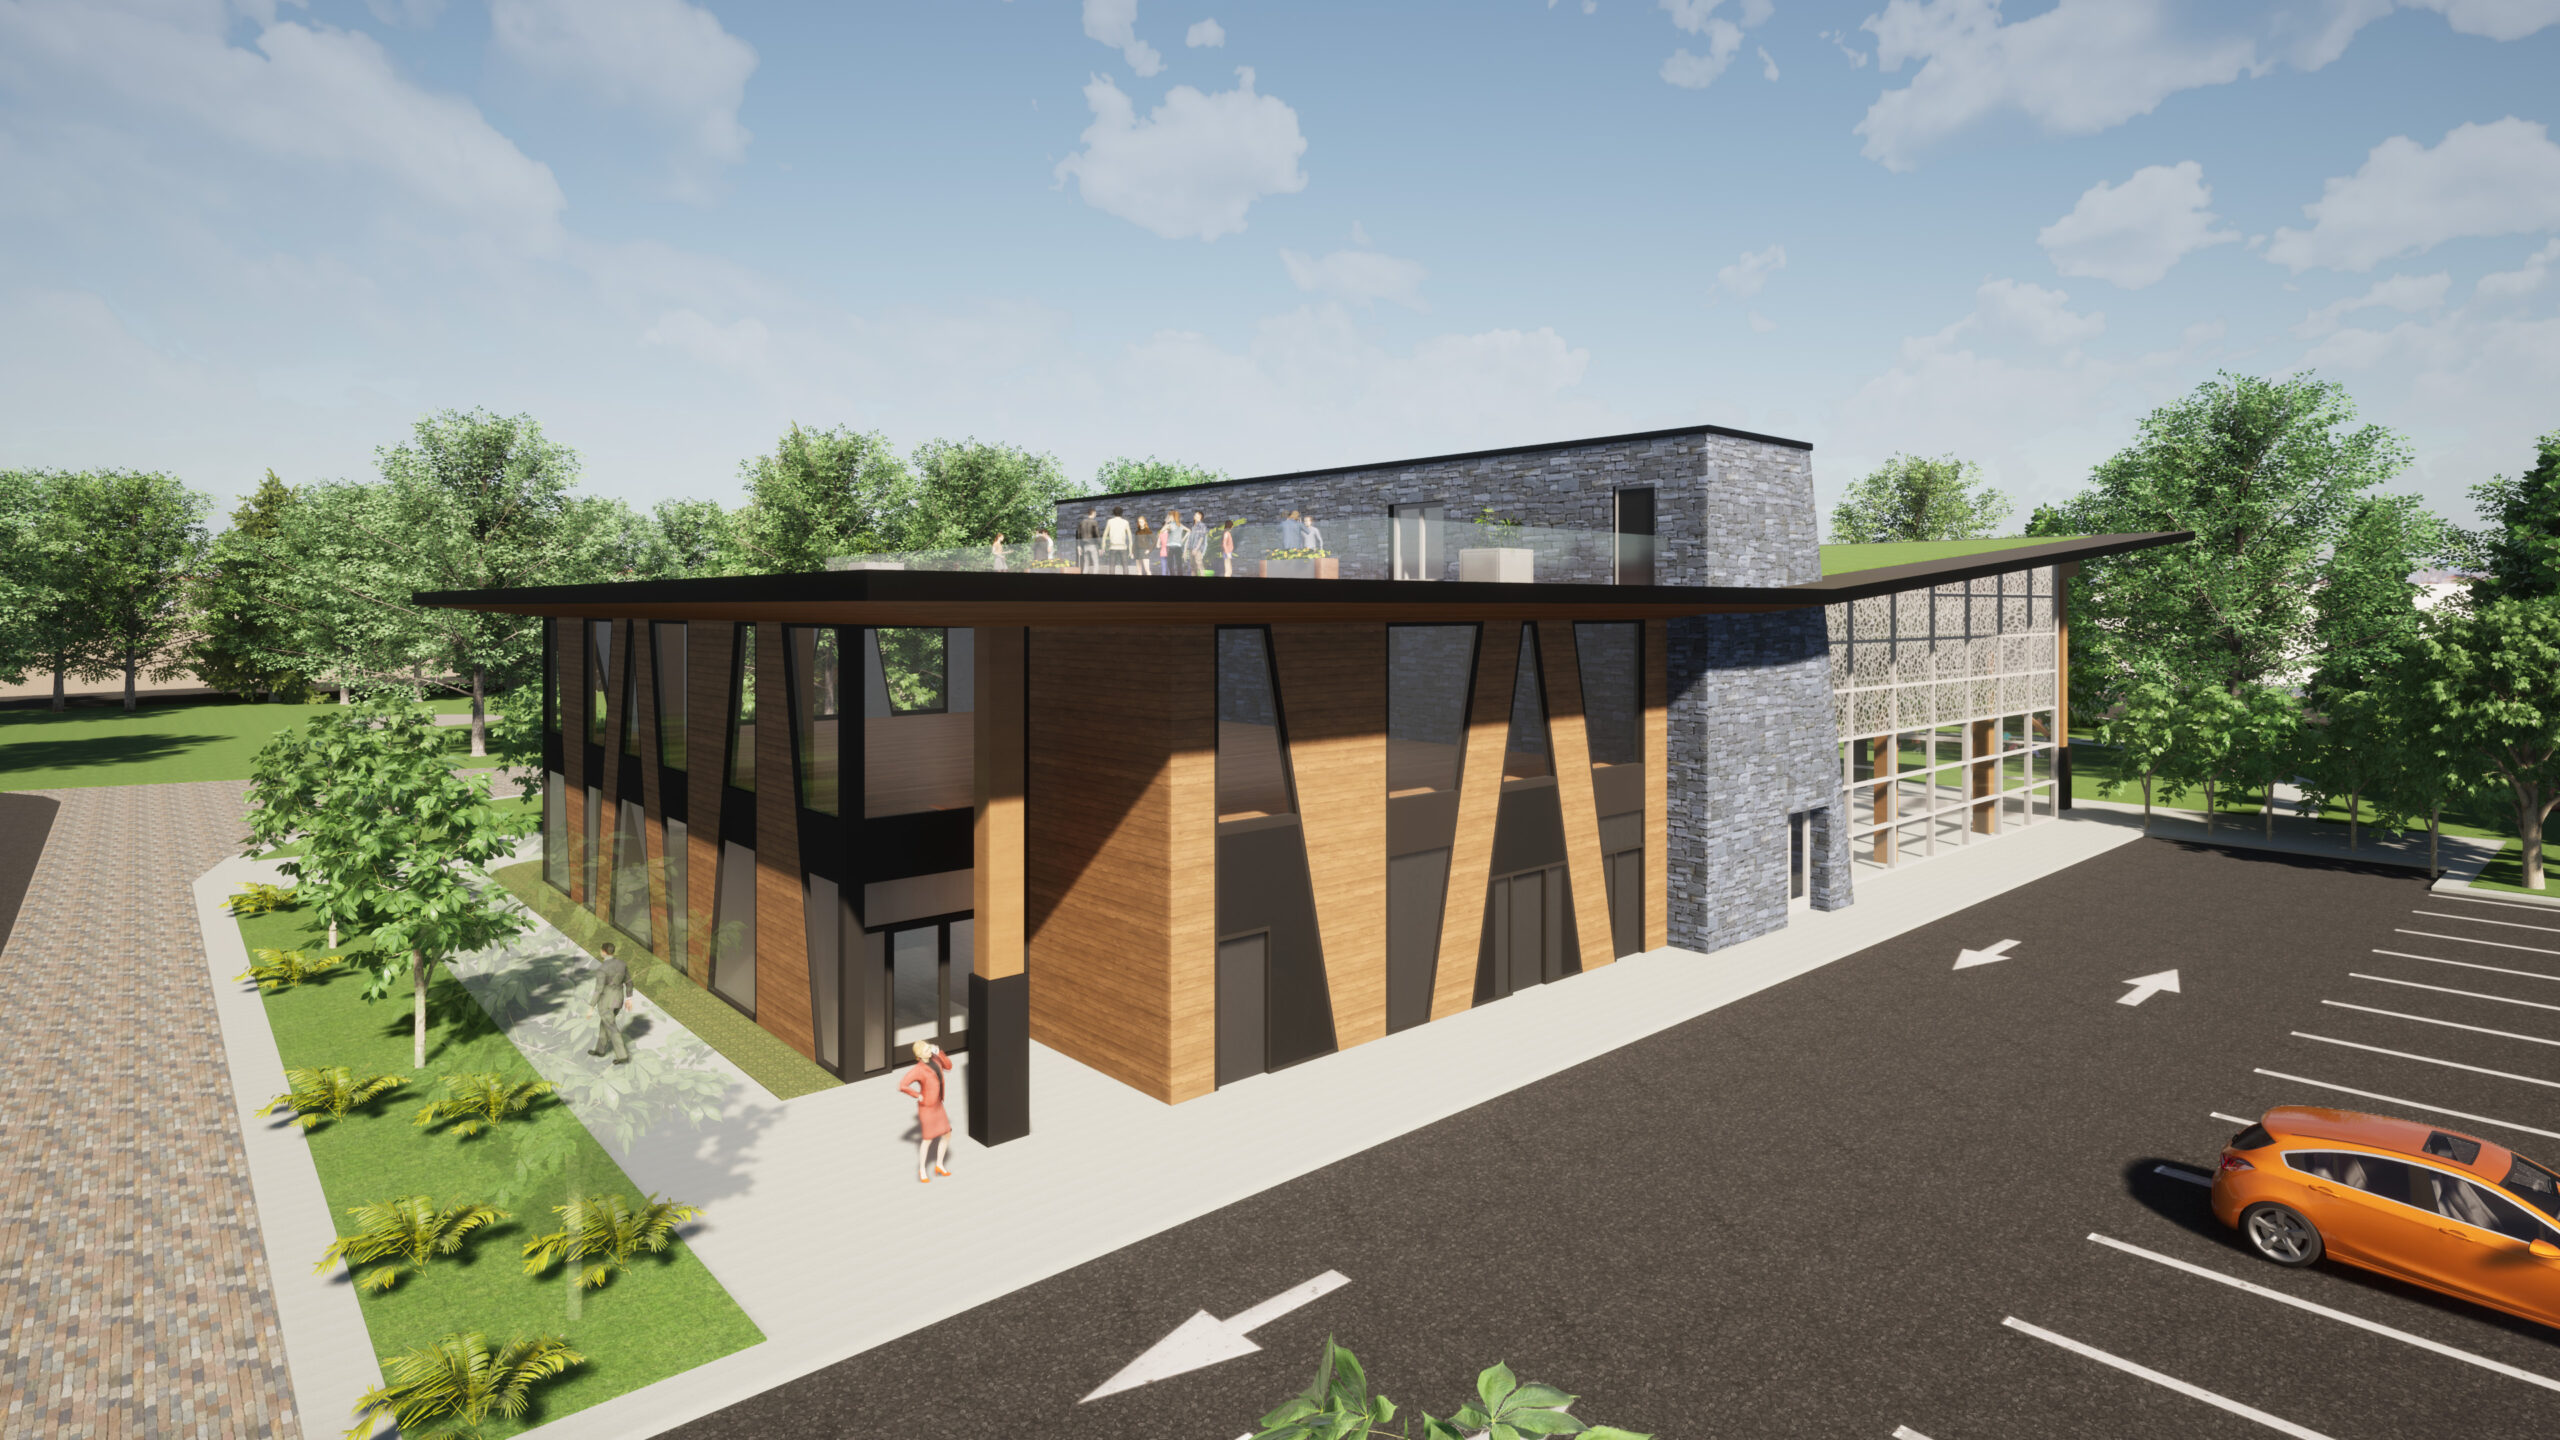 Exterior visualization of Community building, designed by nba architects. Project is focused on sustainable construction and includes traditional exposed mass-timber, post & beam construction, and a low pitch long-span roof.